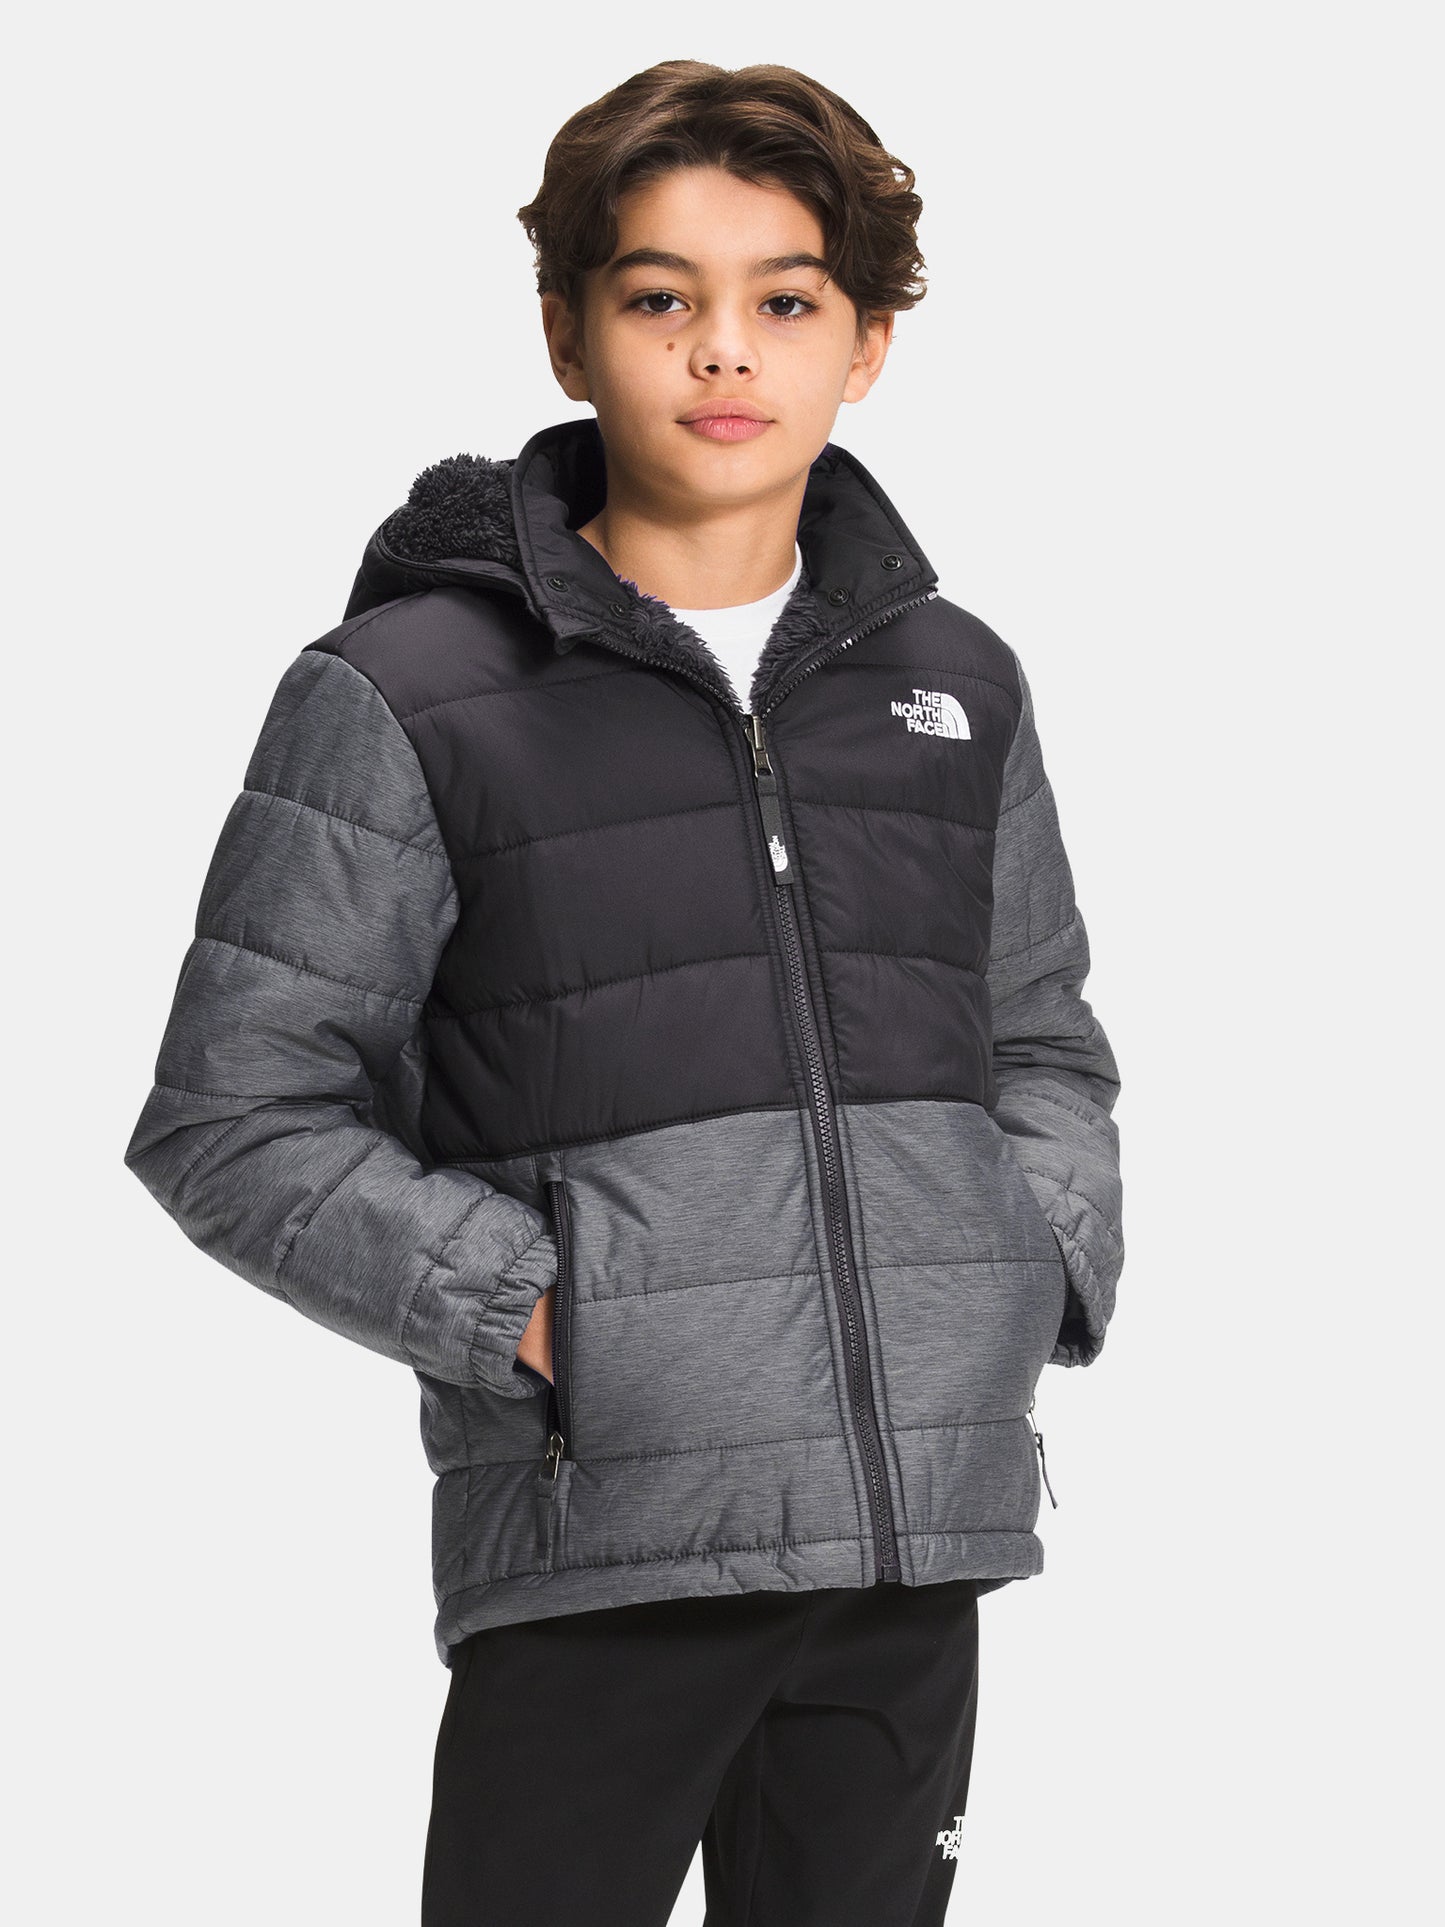 The North Face Boys’ Reversible Mount Chimbo Full Zip Hooded Jacket